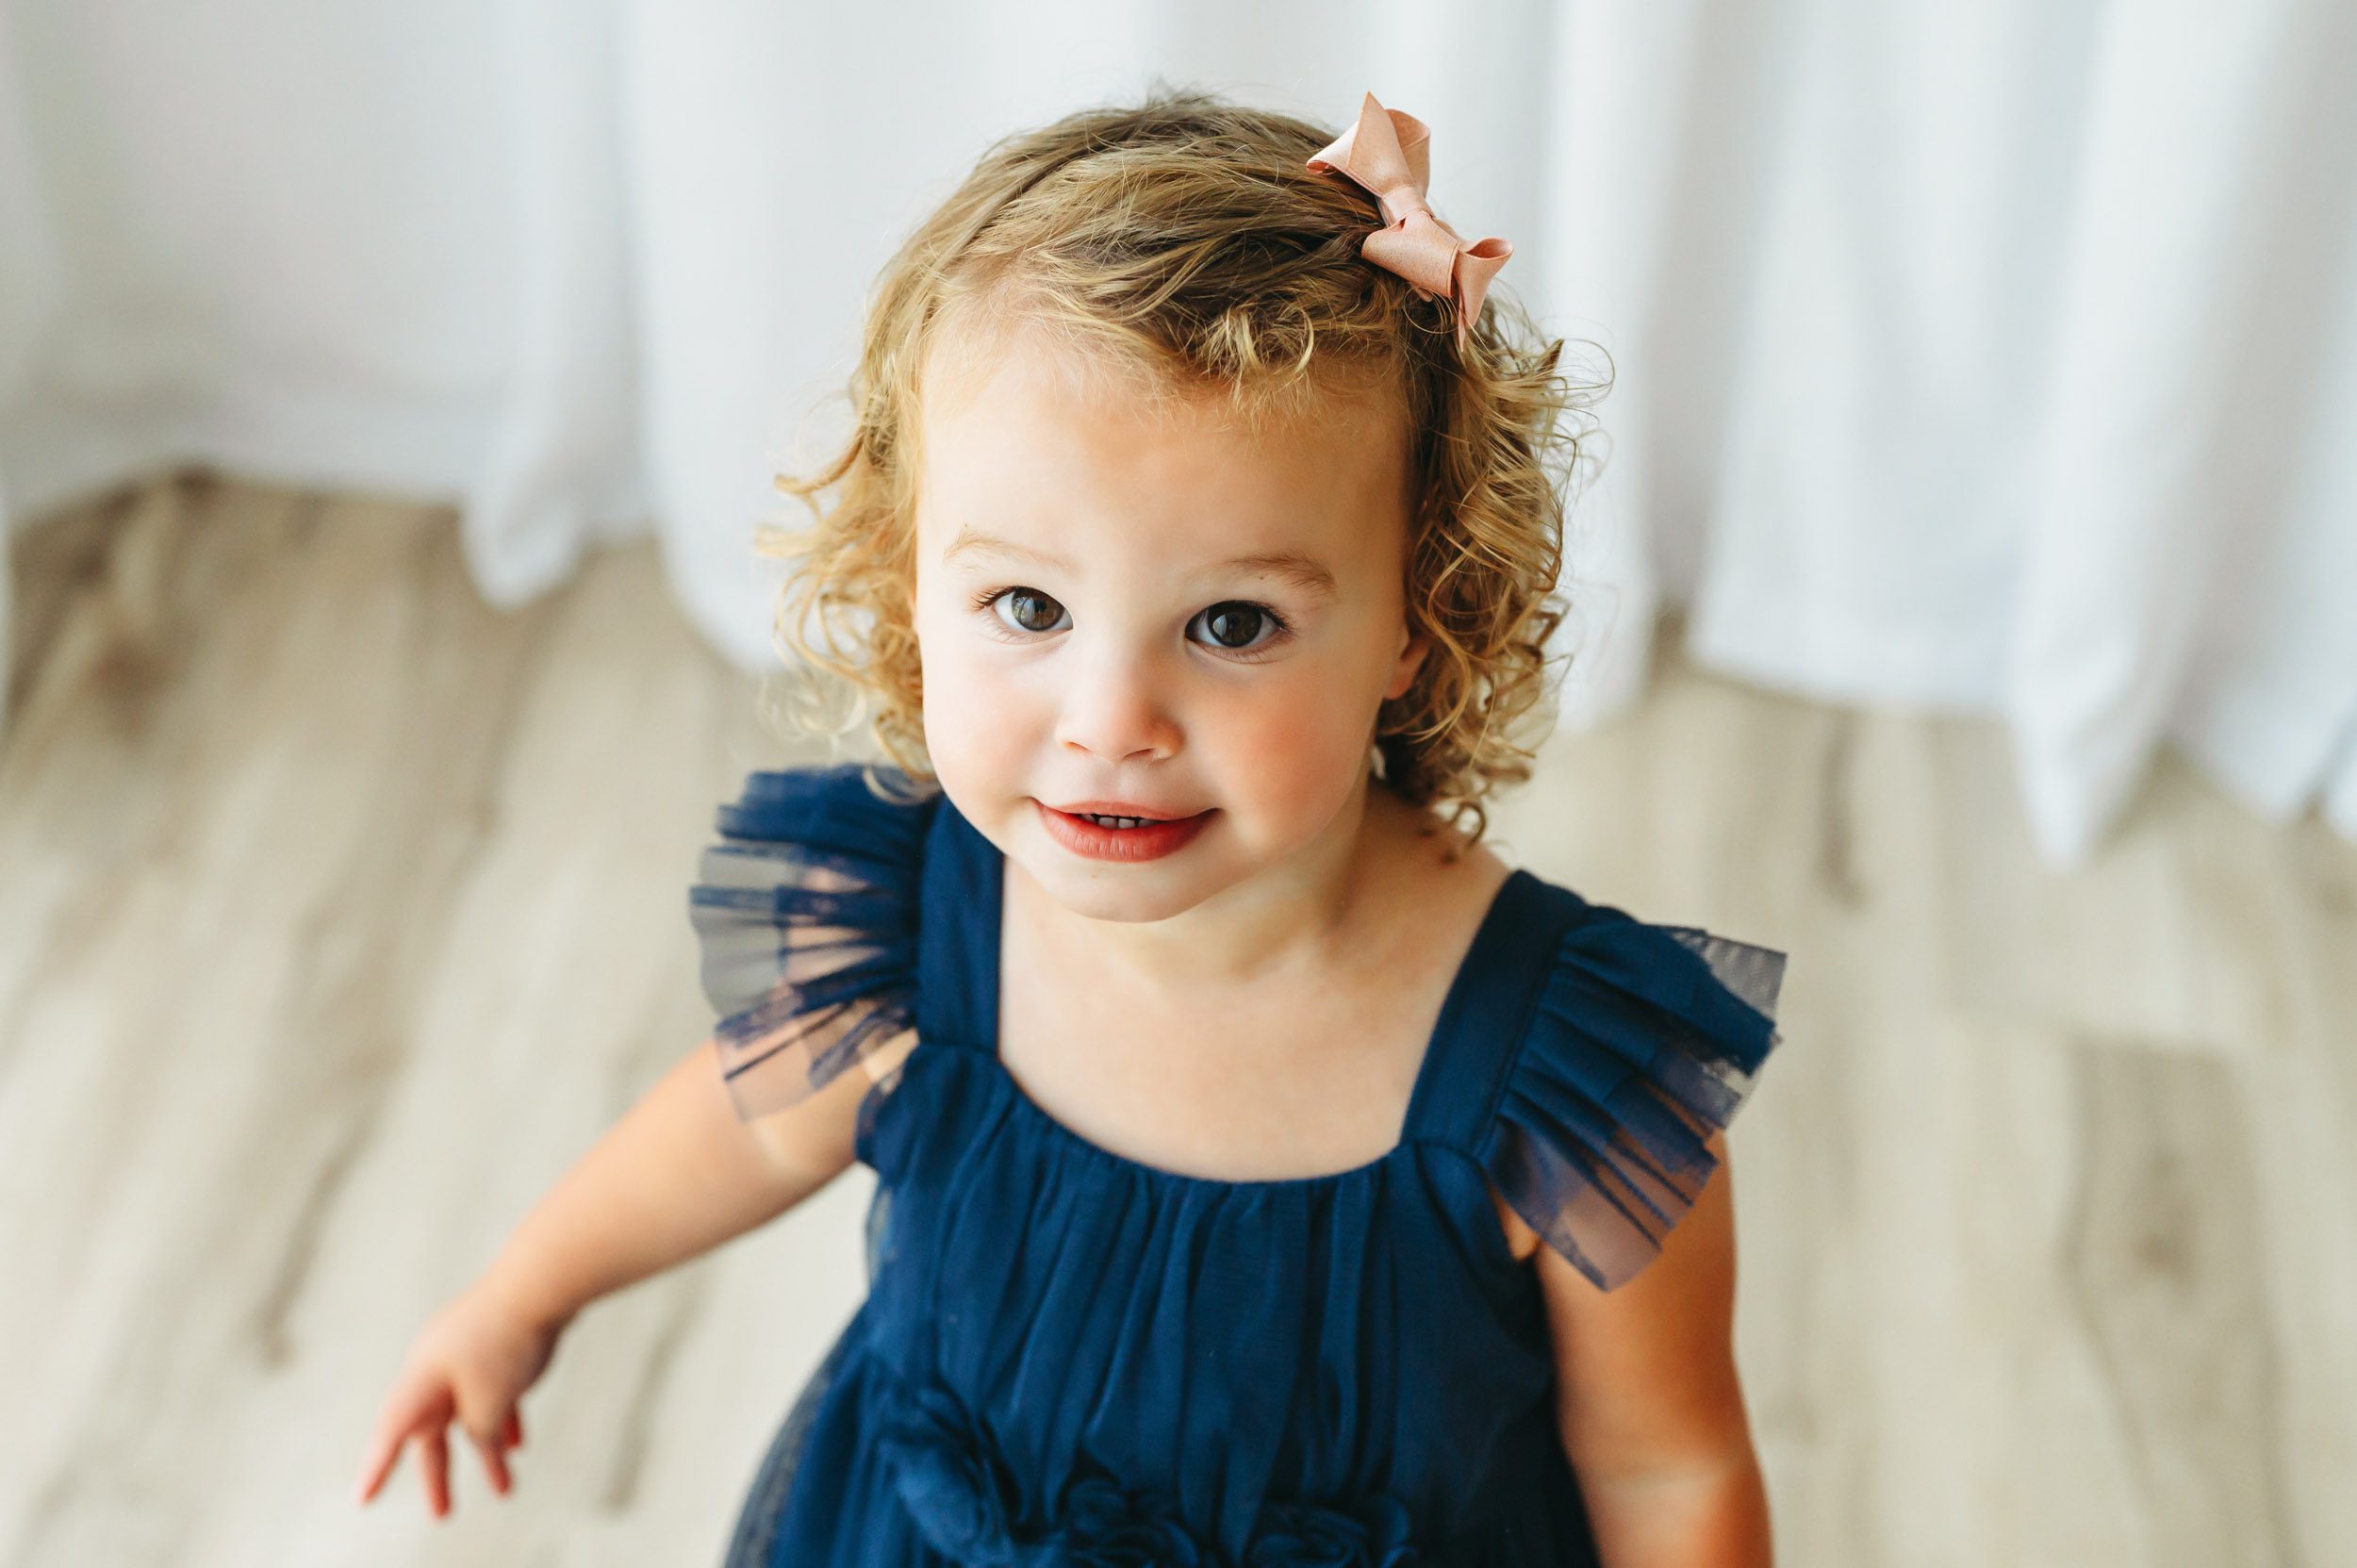 a picture taken from above of a little girl wearing a blue dress looking up at the camera above her during a toddler milestone photos session